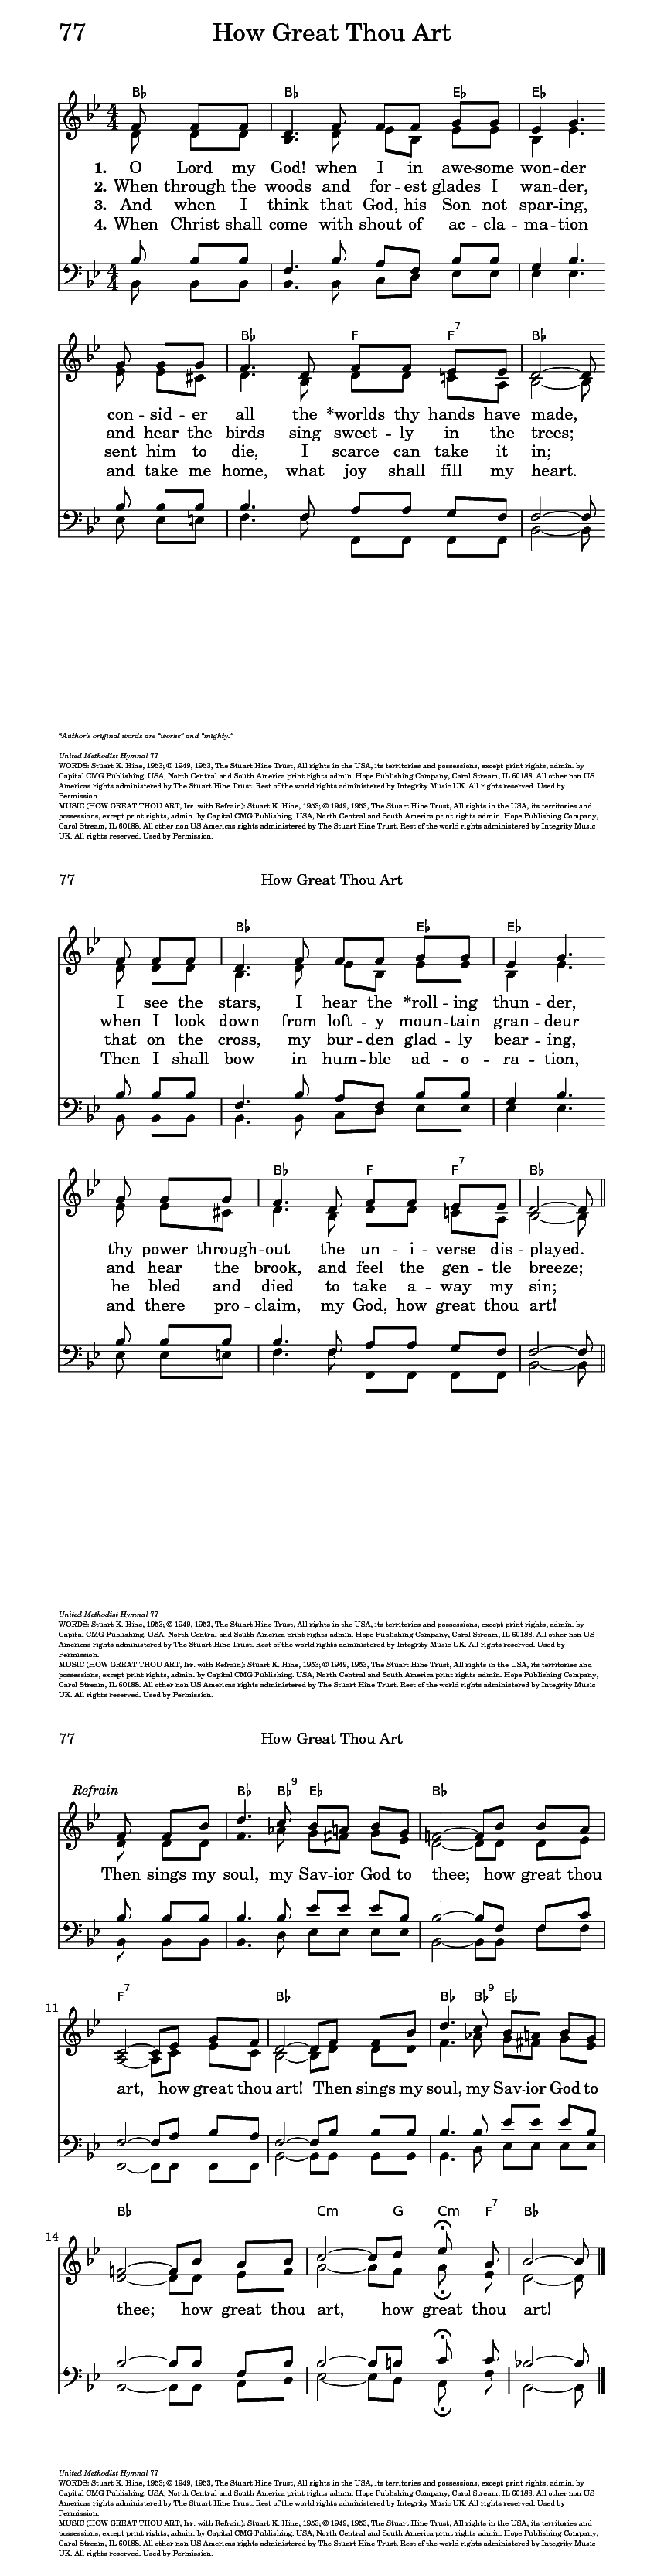 How Great Thou Art Chords The United Methodist Hymnal 77 O Lord My God When I In Awesome